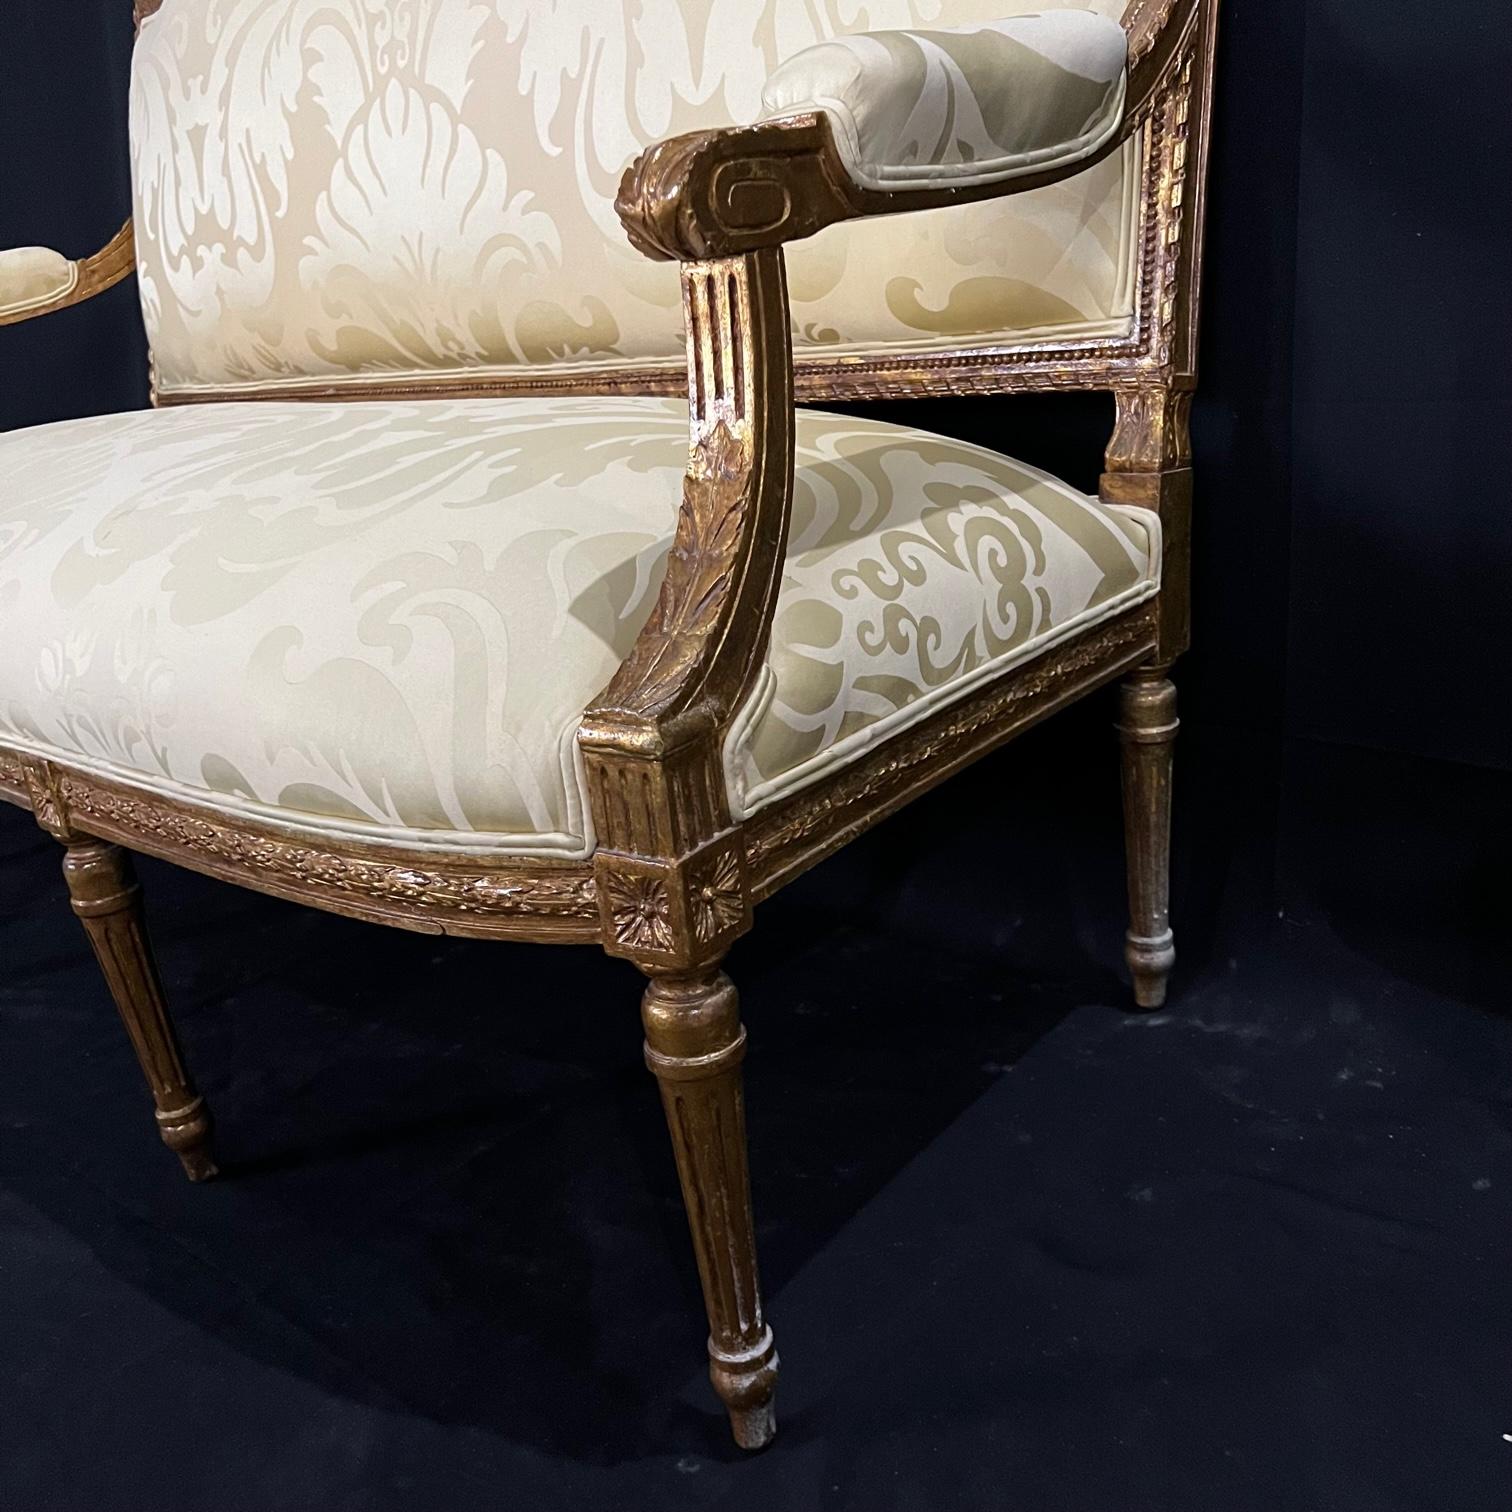 Fancy Louis XVI Giltwood Sofa Loveseat with New Silk Upholstery For Sale 5